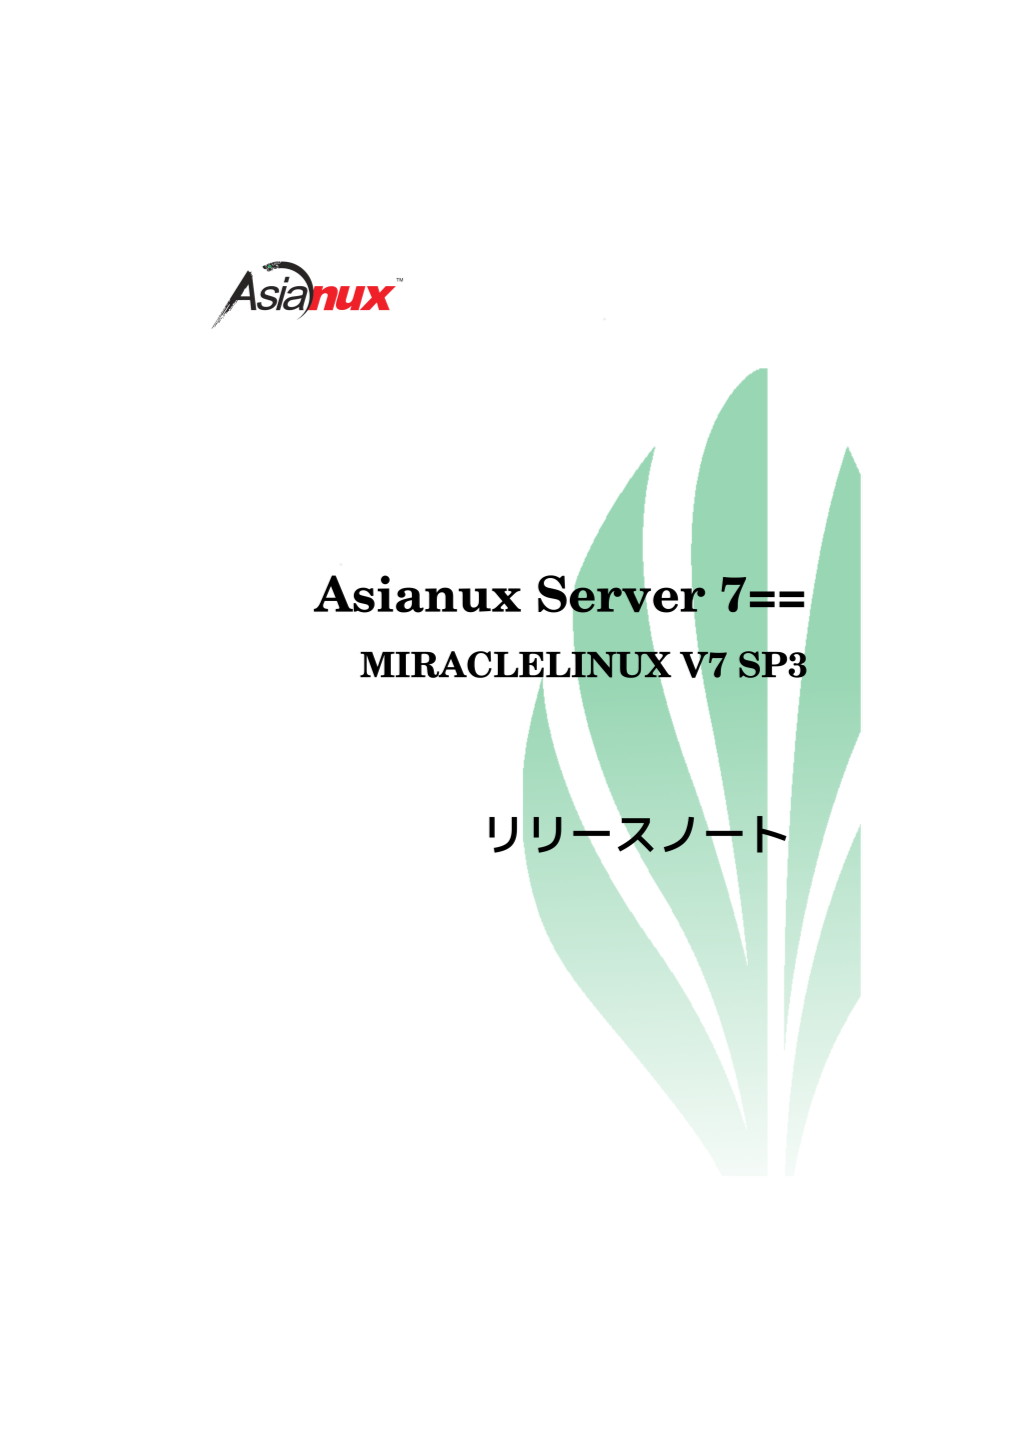 Asianux Server 7 == MIRACLE LINUX V7 SP3リリースノート